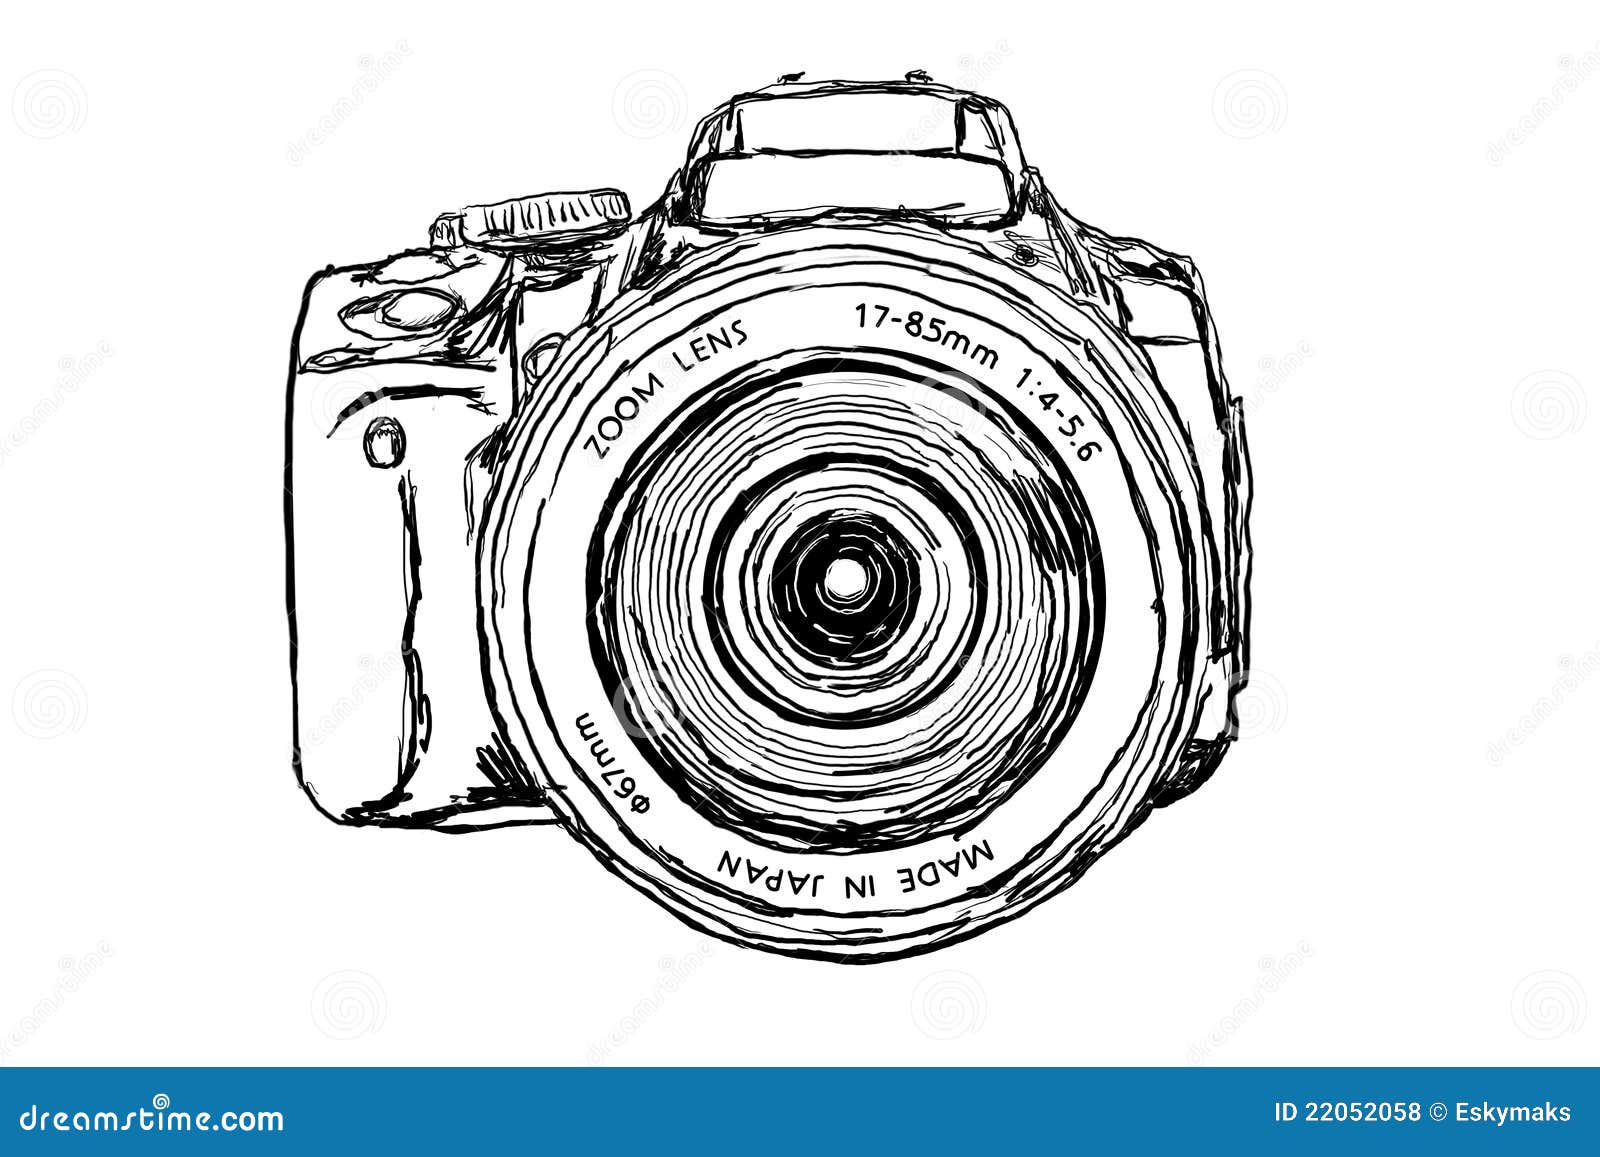 dslr camera - front view